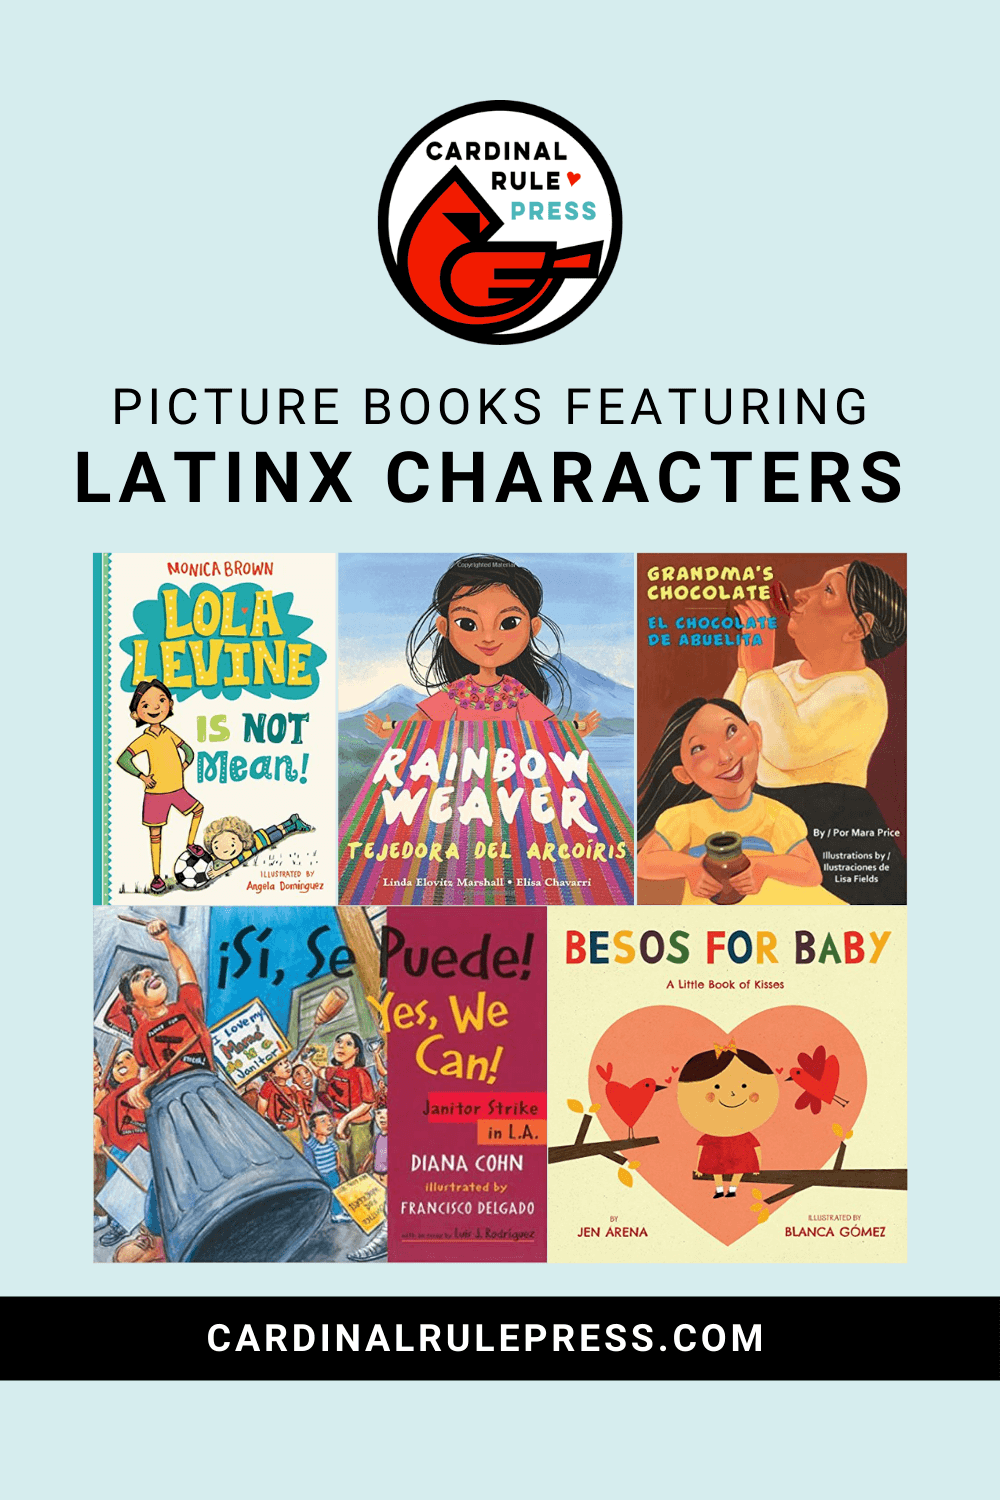 Picture Books Featuring LatinX Characters. We are celebrating National Hispanic Heritage Month by looking at some of our favorite picture books featuring LatinX characters! #LatinX #PictureBooks #ChildrensBook #NationalHeritage